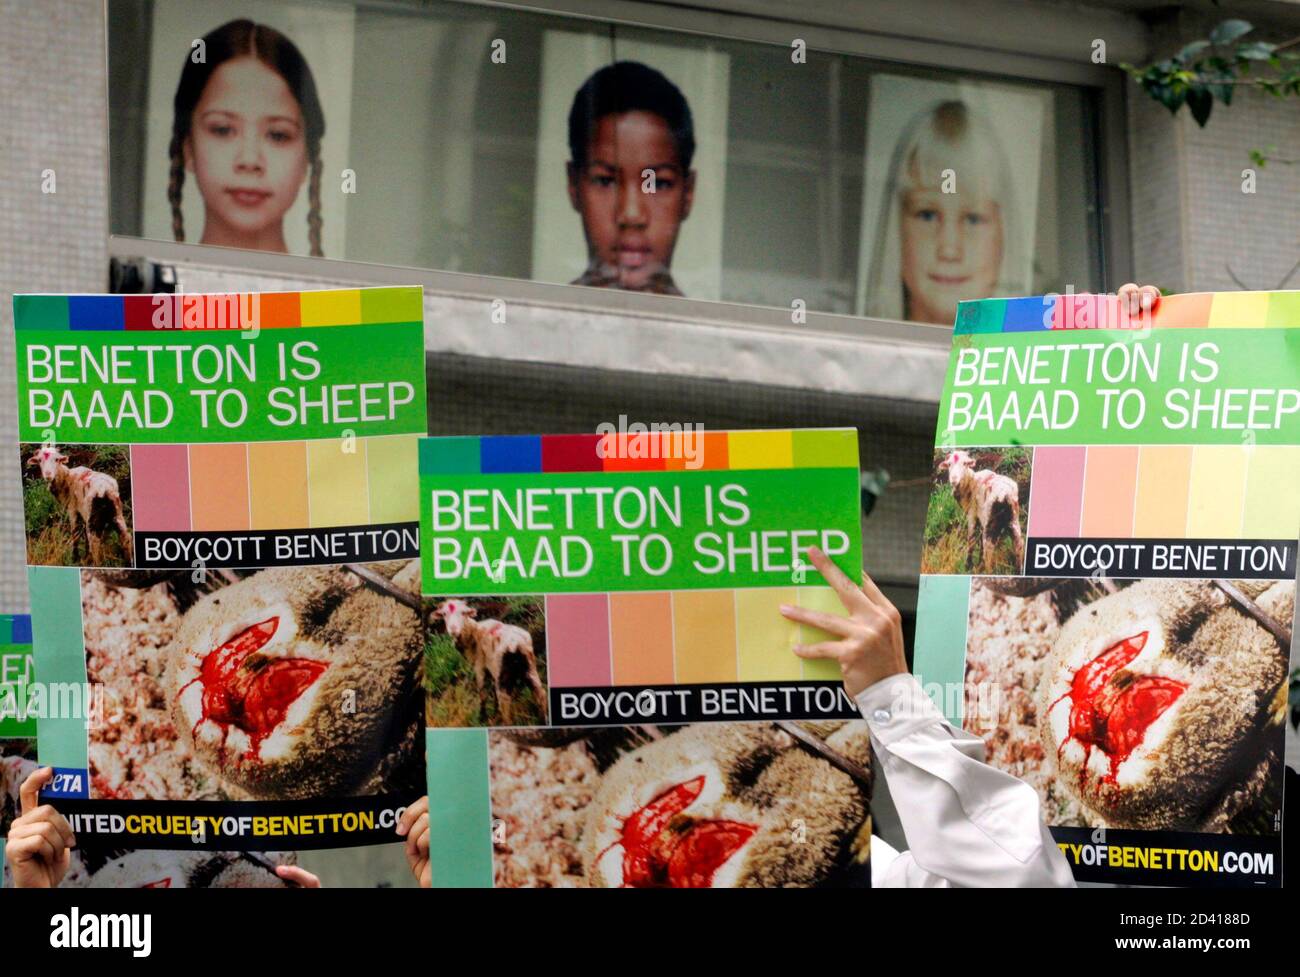 Members of People for the Ethical Treatment of Animals (PETA) hold banners  during a demonstration outside a Benetton clothing store in Sao Paulo July  18, 2005. PETA accused Benetton over its use